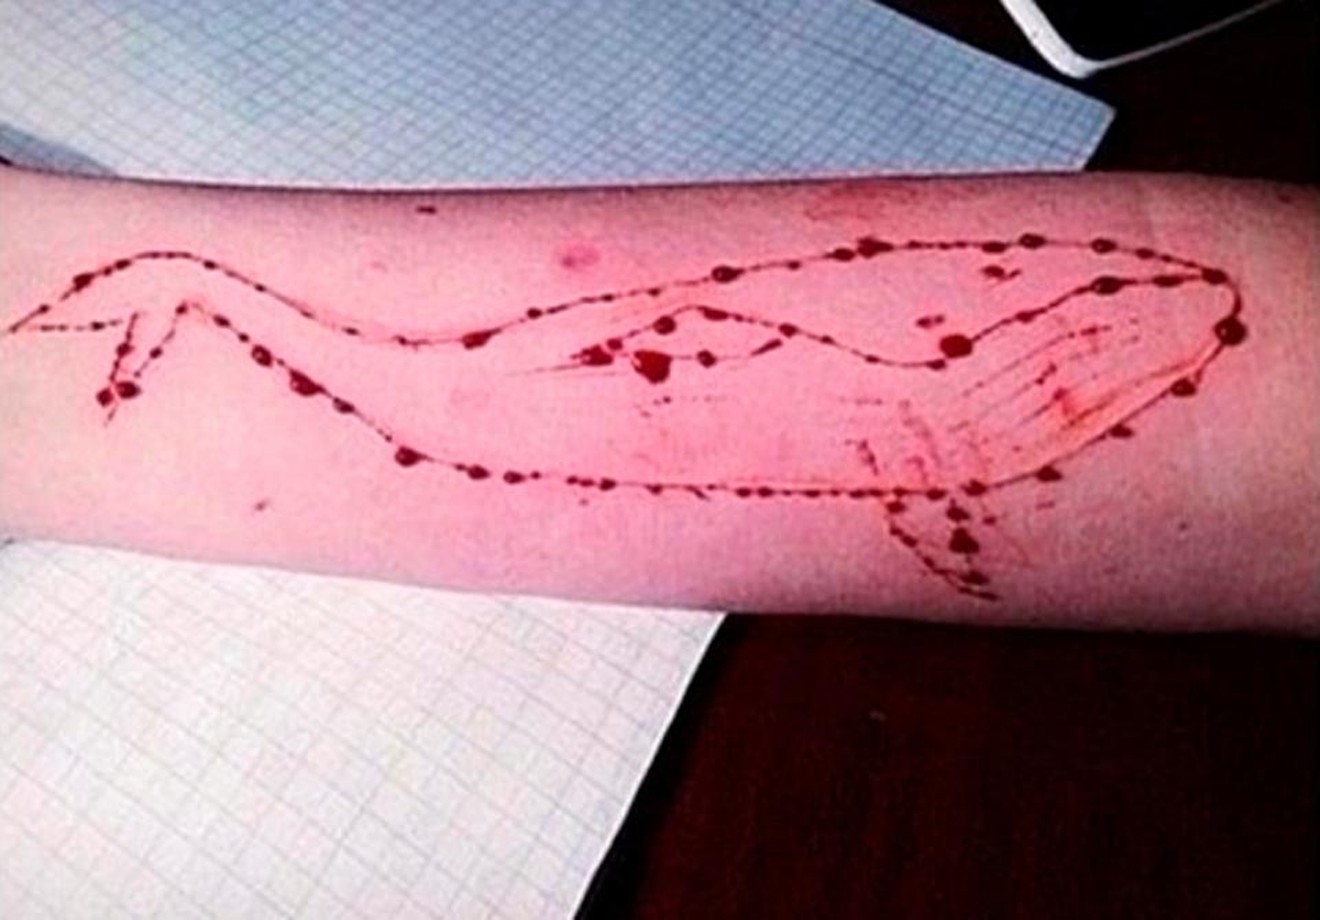 A purported photo of a blue whale cutting on someone's arm. Maricopa County Attorney Bill Montgomery warned parents on Wednesday about the alleged online game.